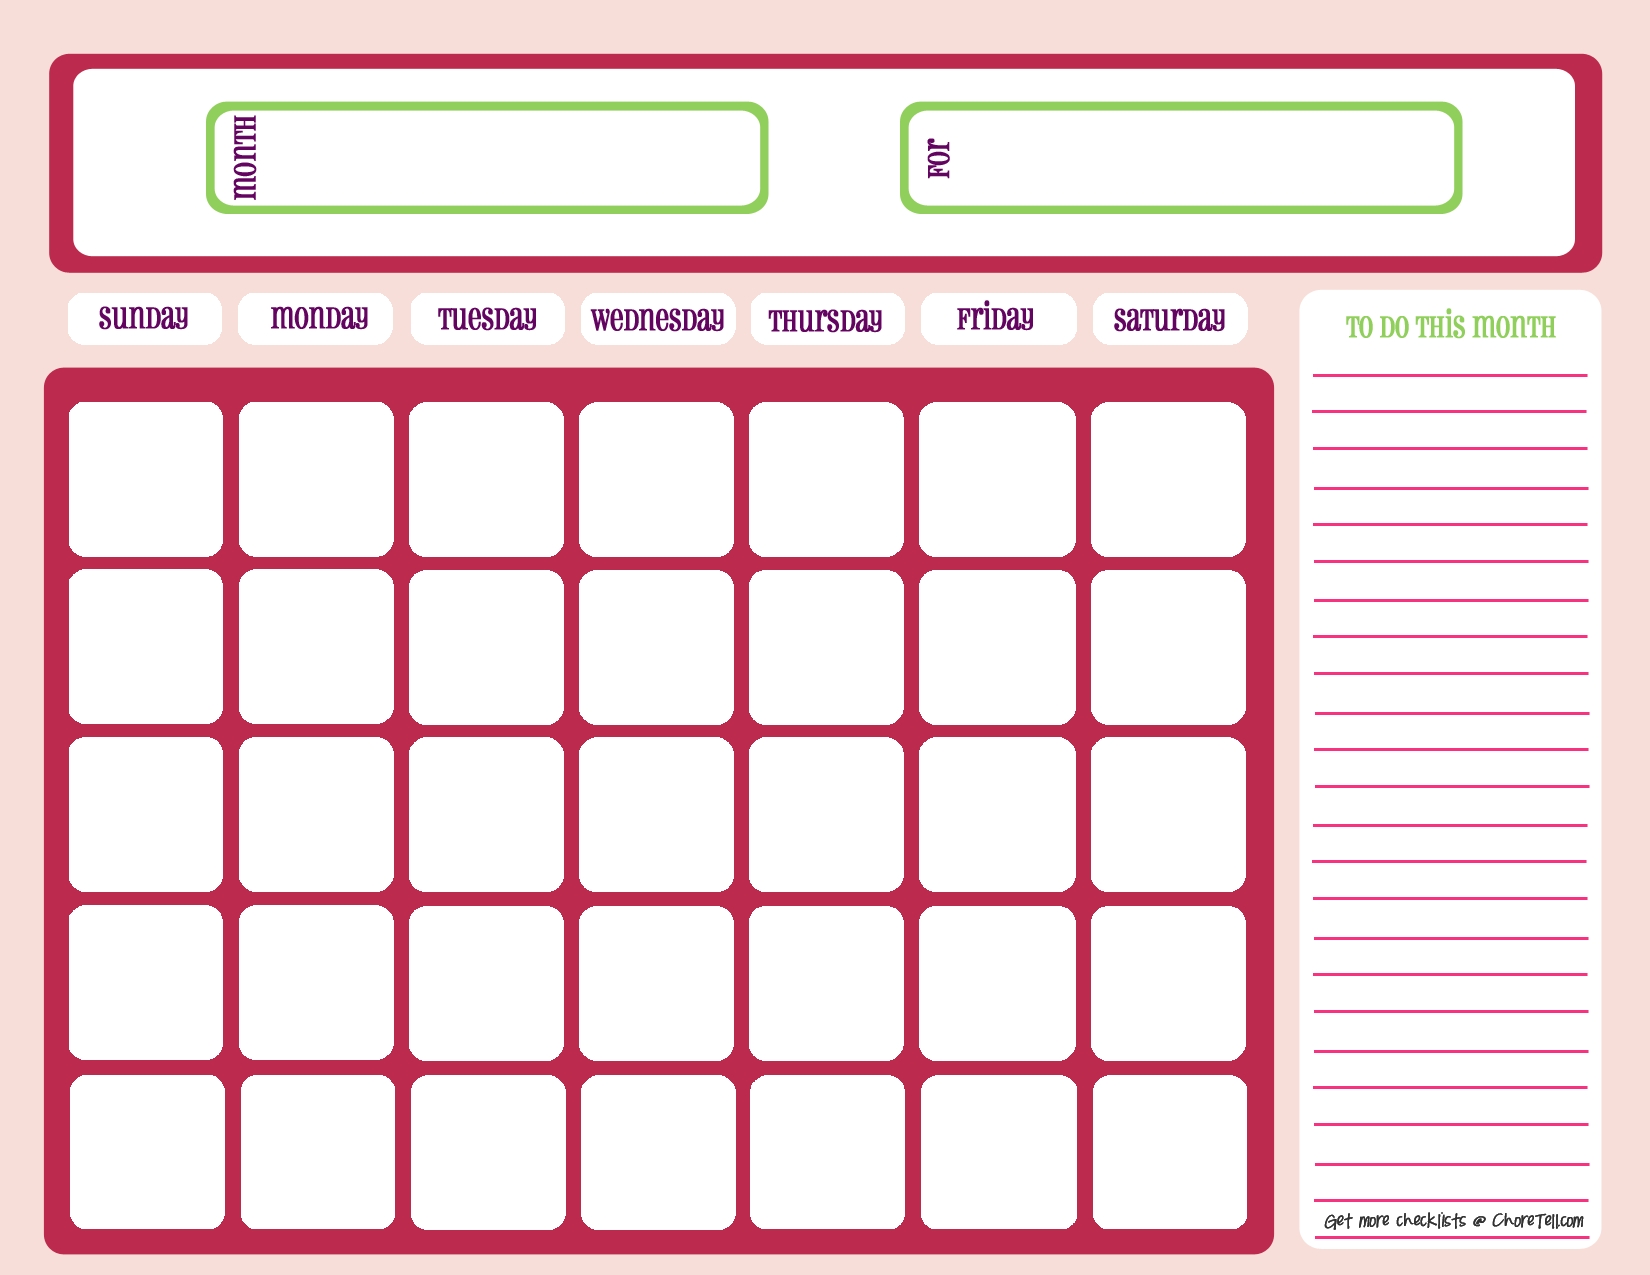 Blank Month Calendar - Pinks - Free Printable Downloads From Choretell throughout Empty Monthly Calendar Print Out